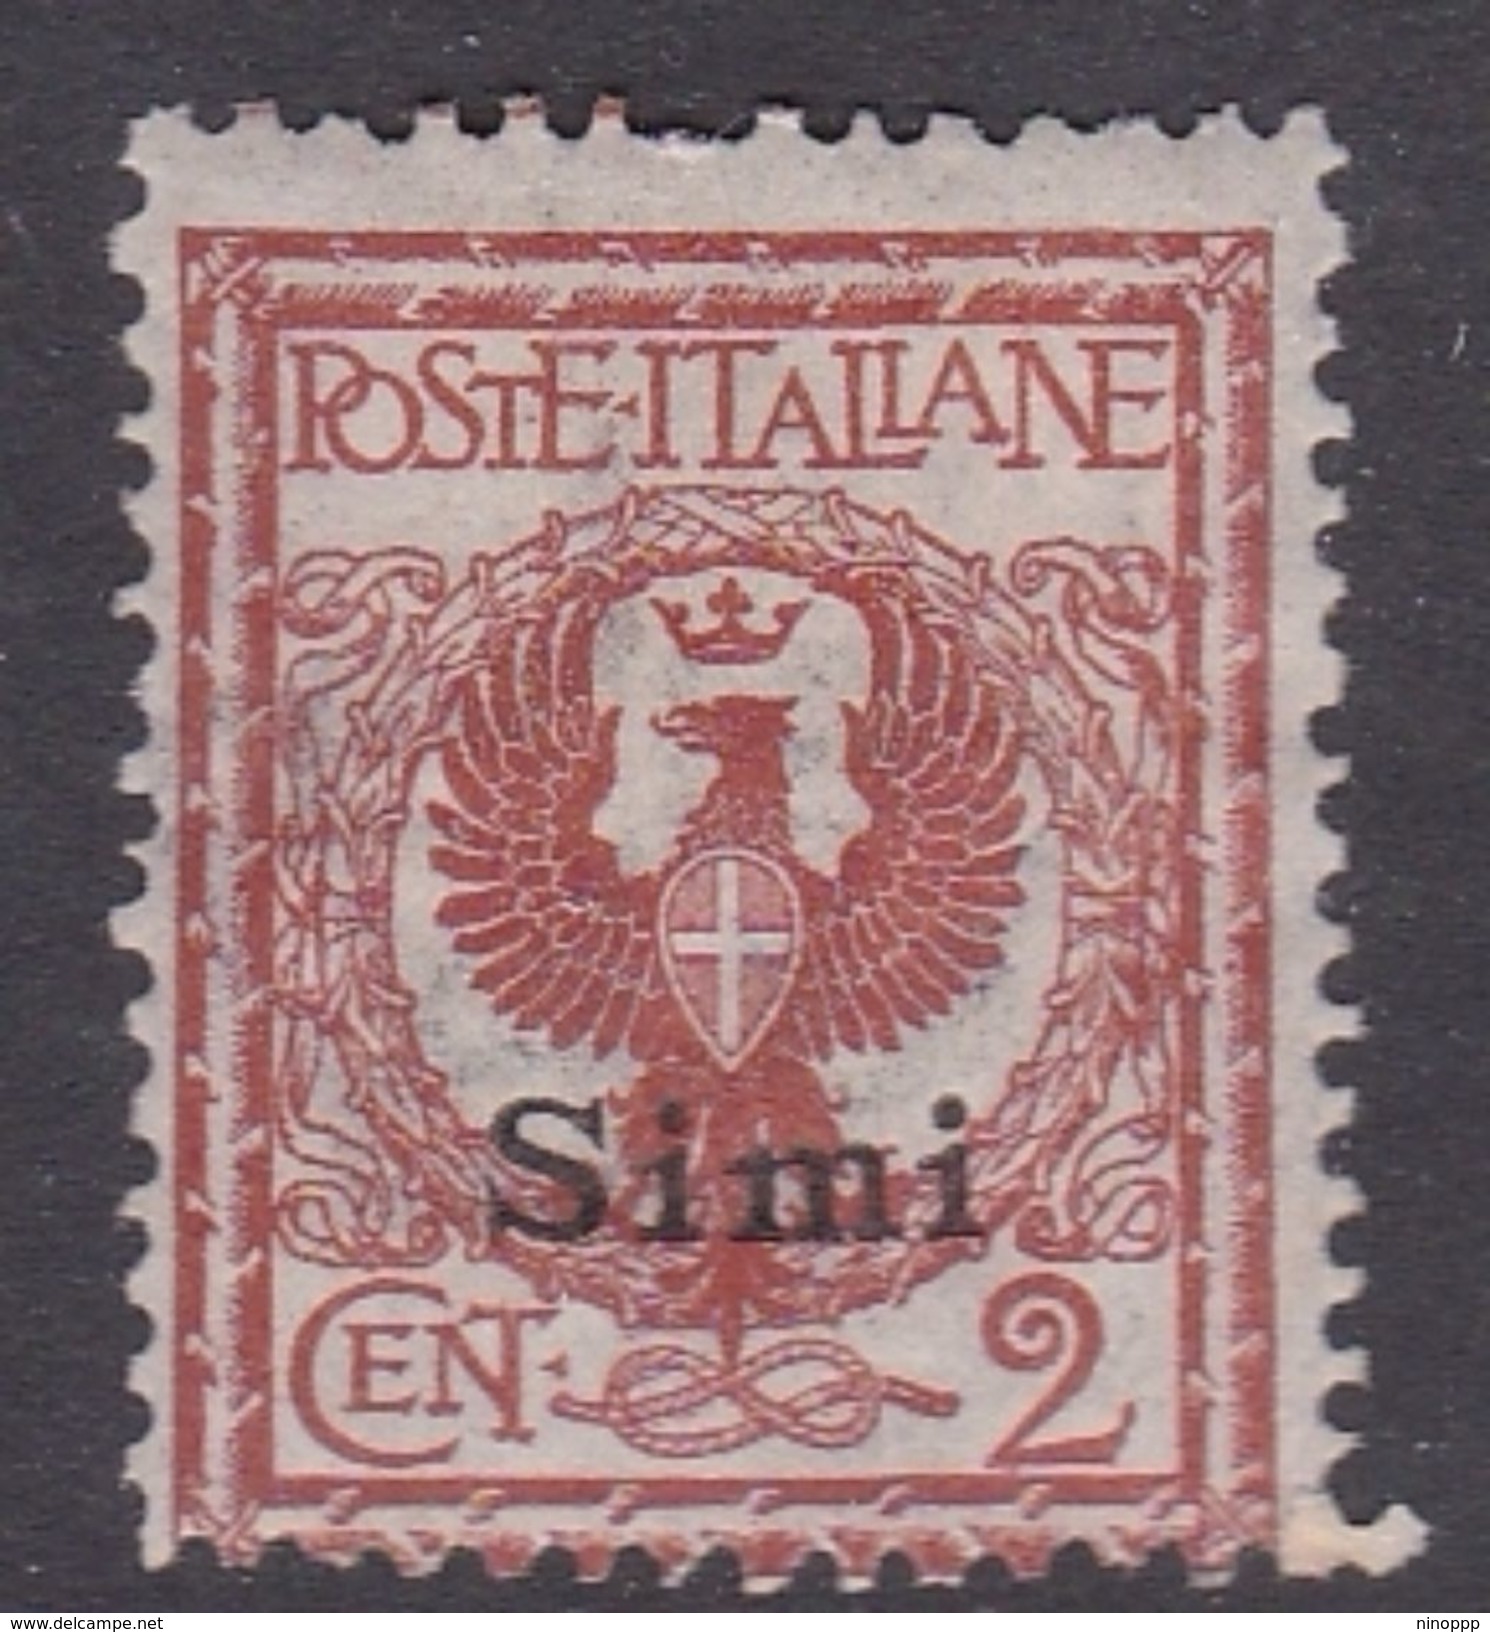 Italy-Colonies And Territories-Aegean-Simi S 1  1912  2c Red Brown MH - Egée (Simi)